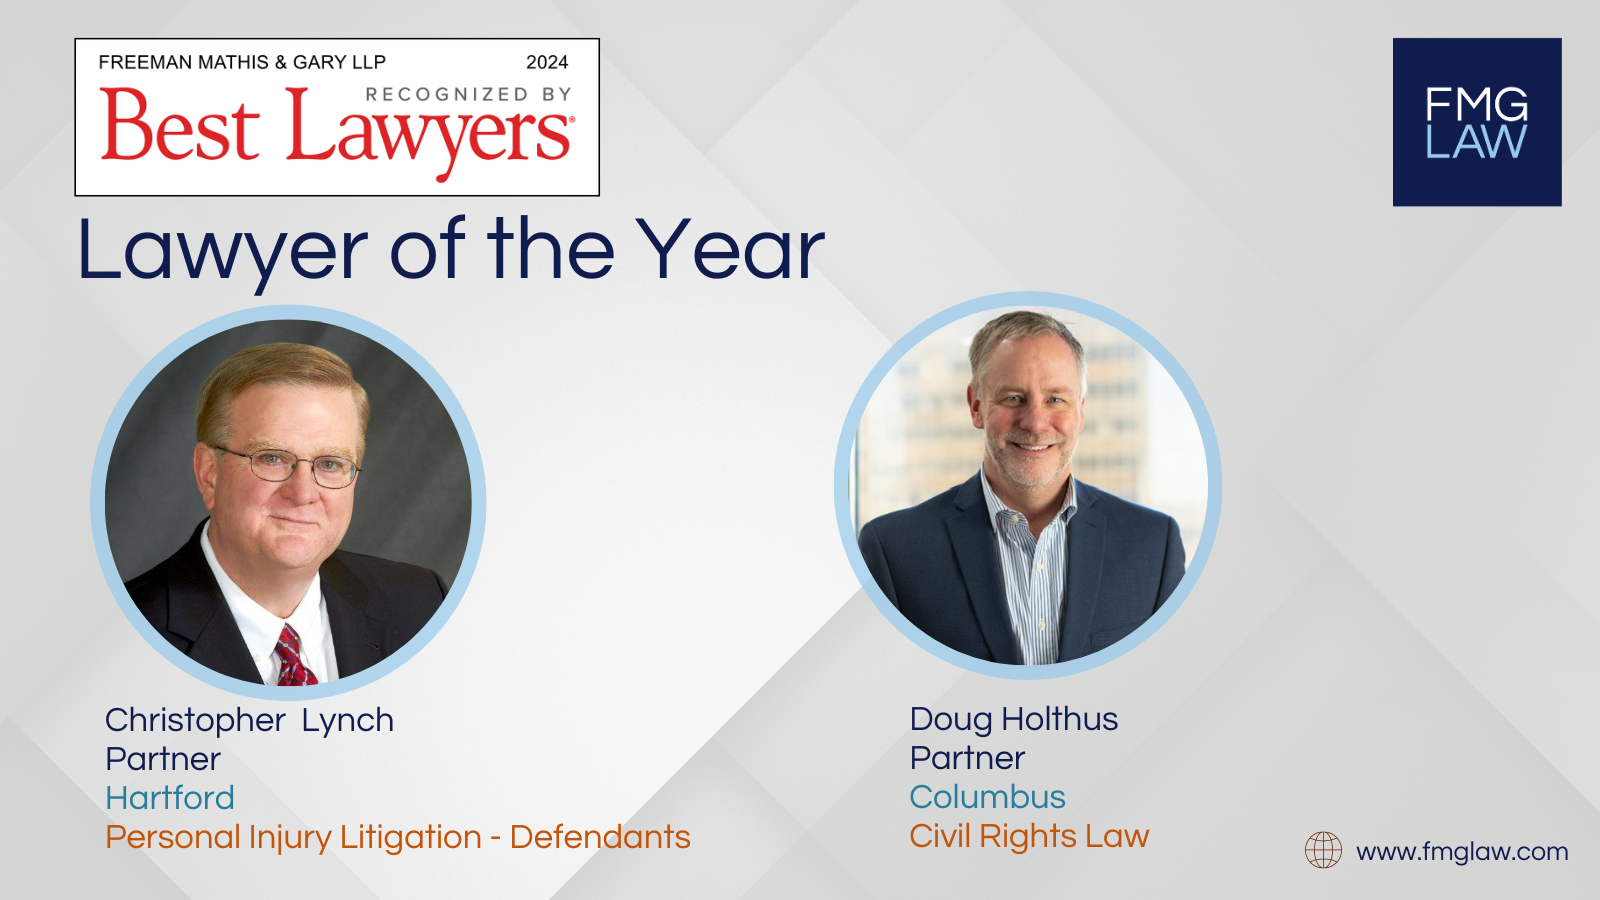 Douglas Holthus and Christopher Lynch Named 2024 Best Lawyers® “Lawyer